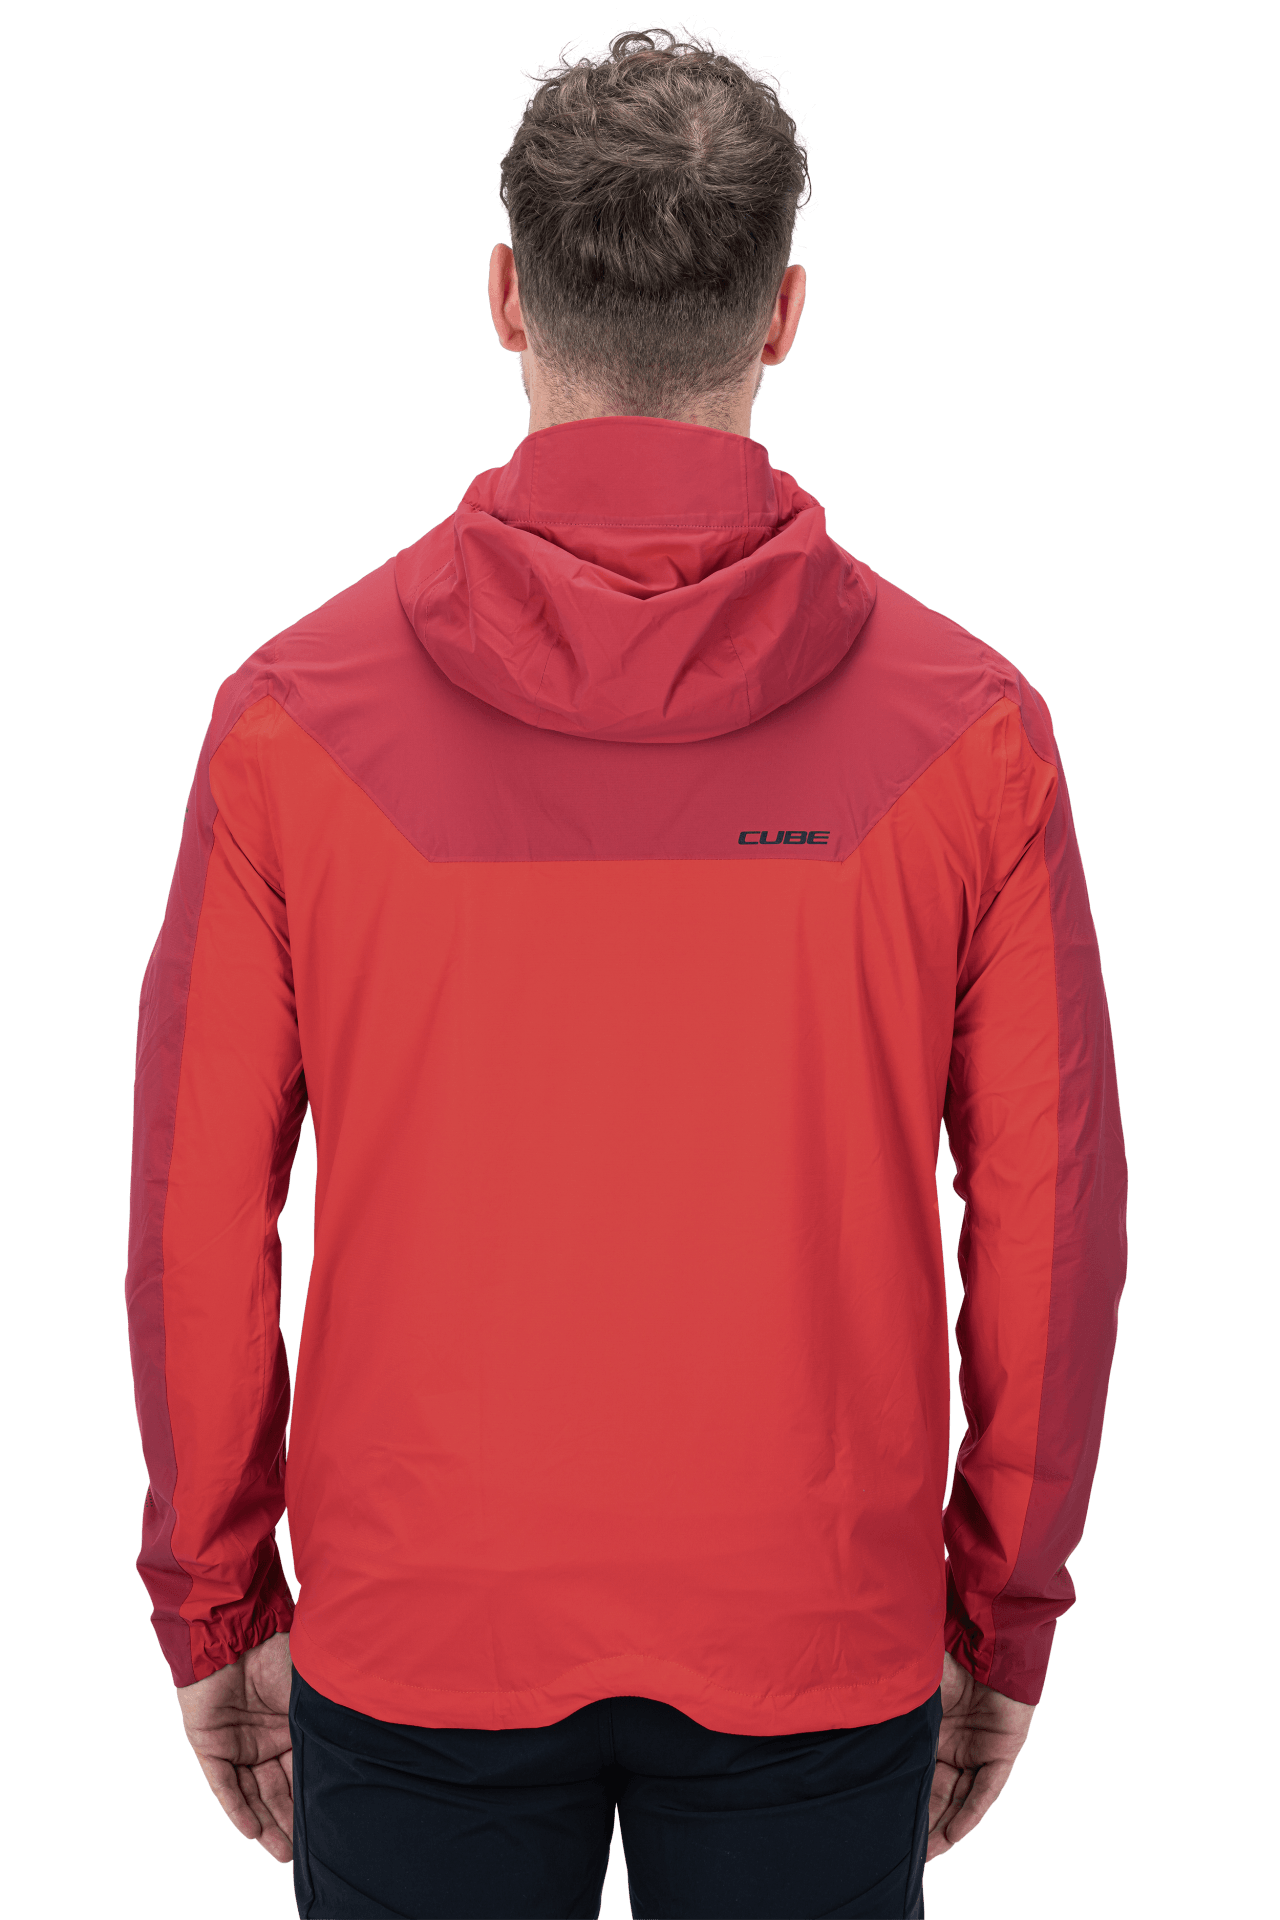 CUBE ATX Storm Jacket X Actionteam red S